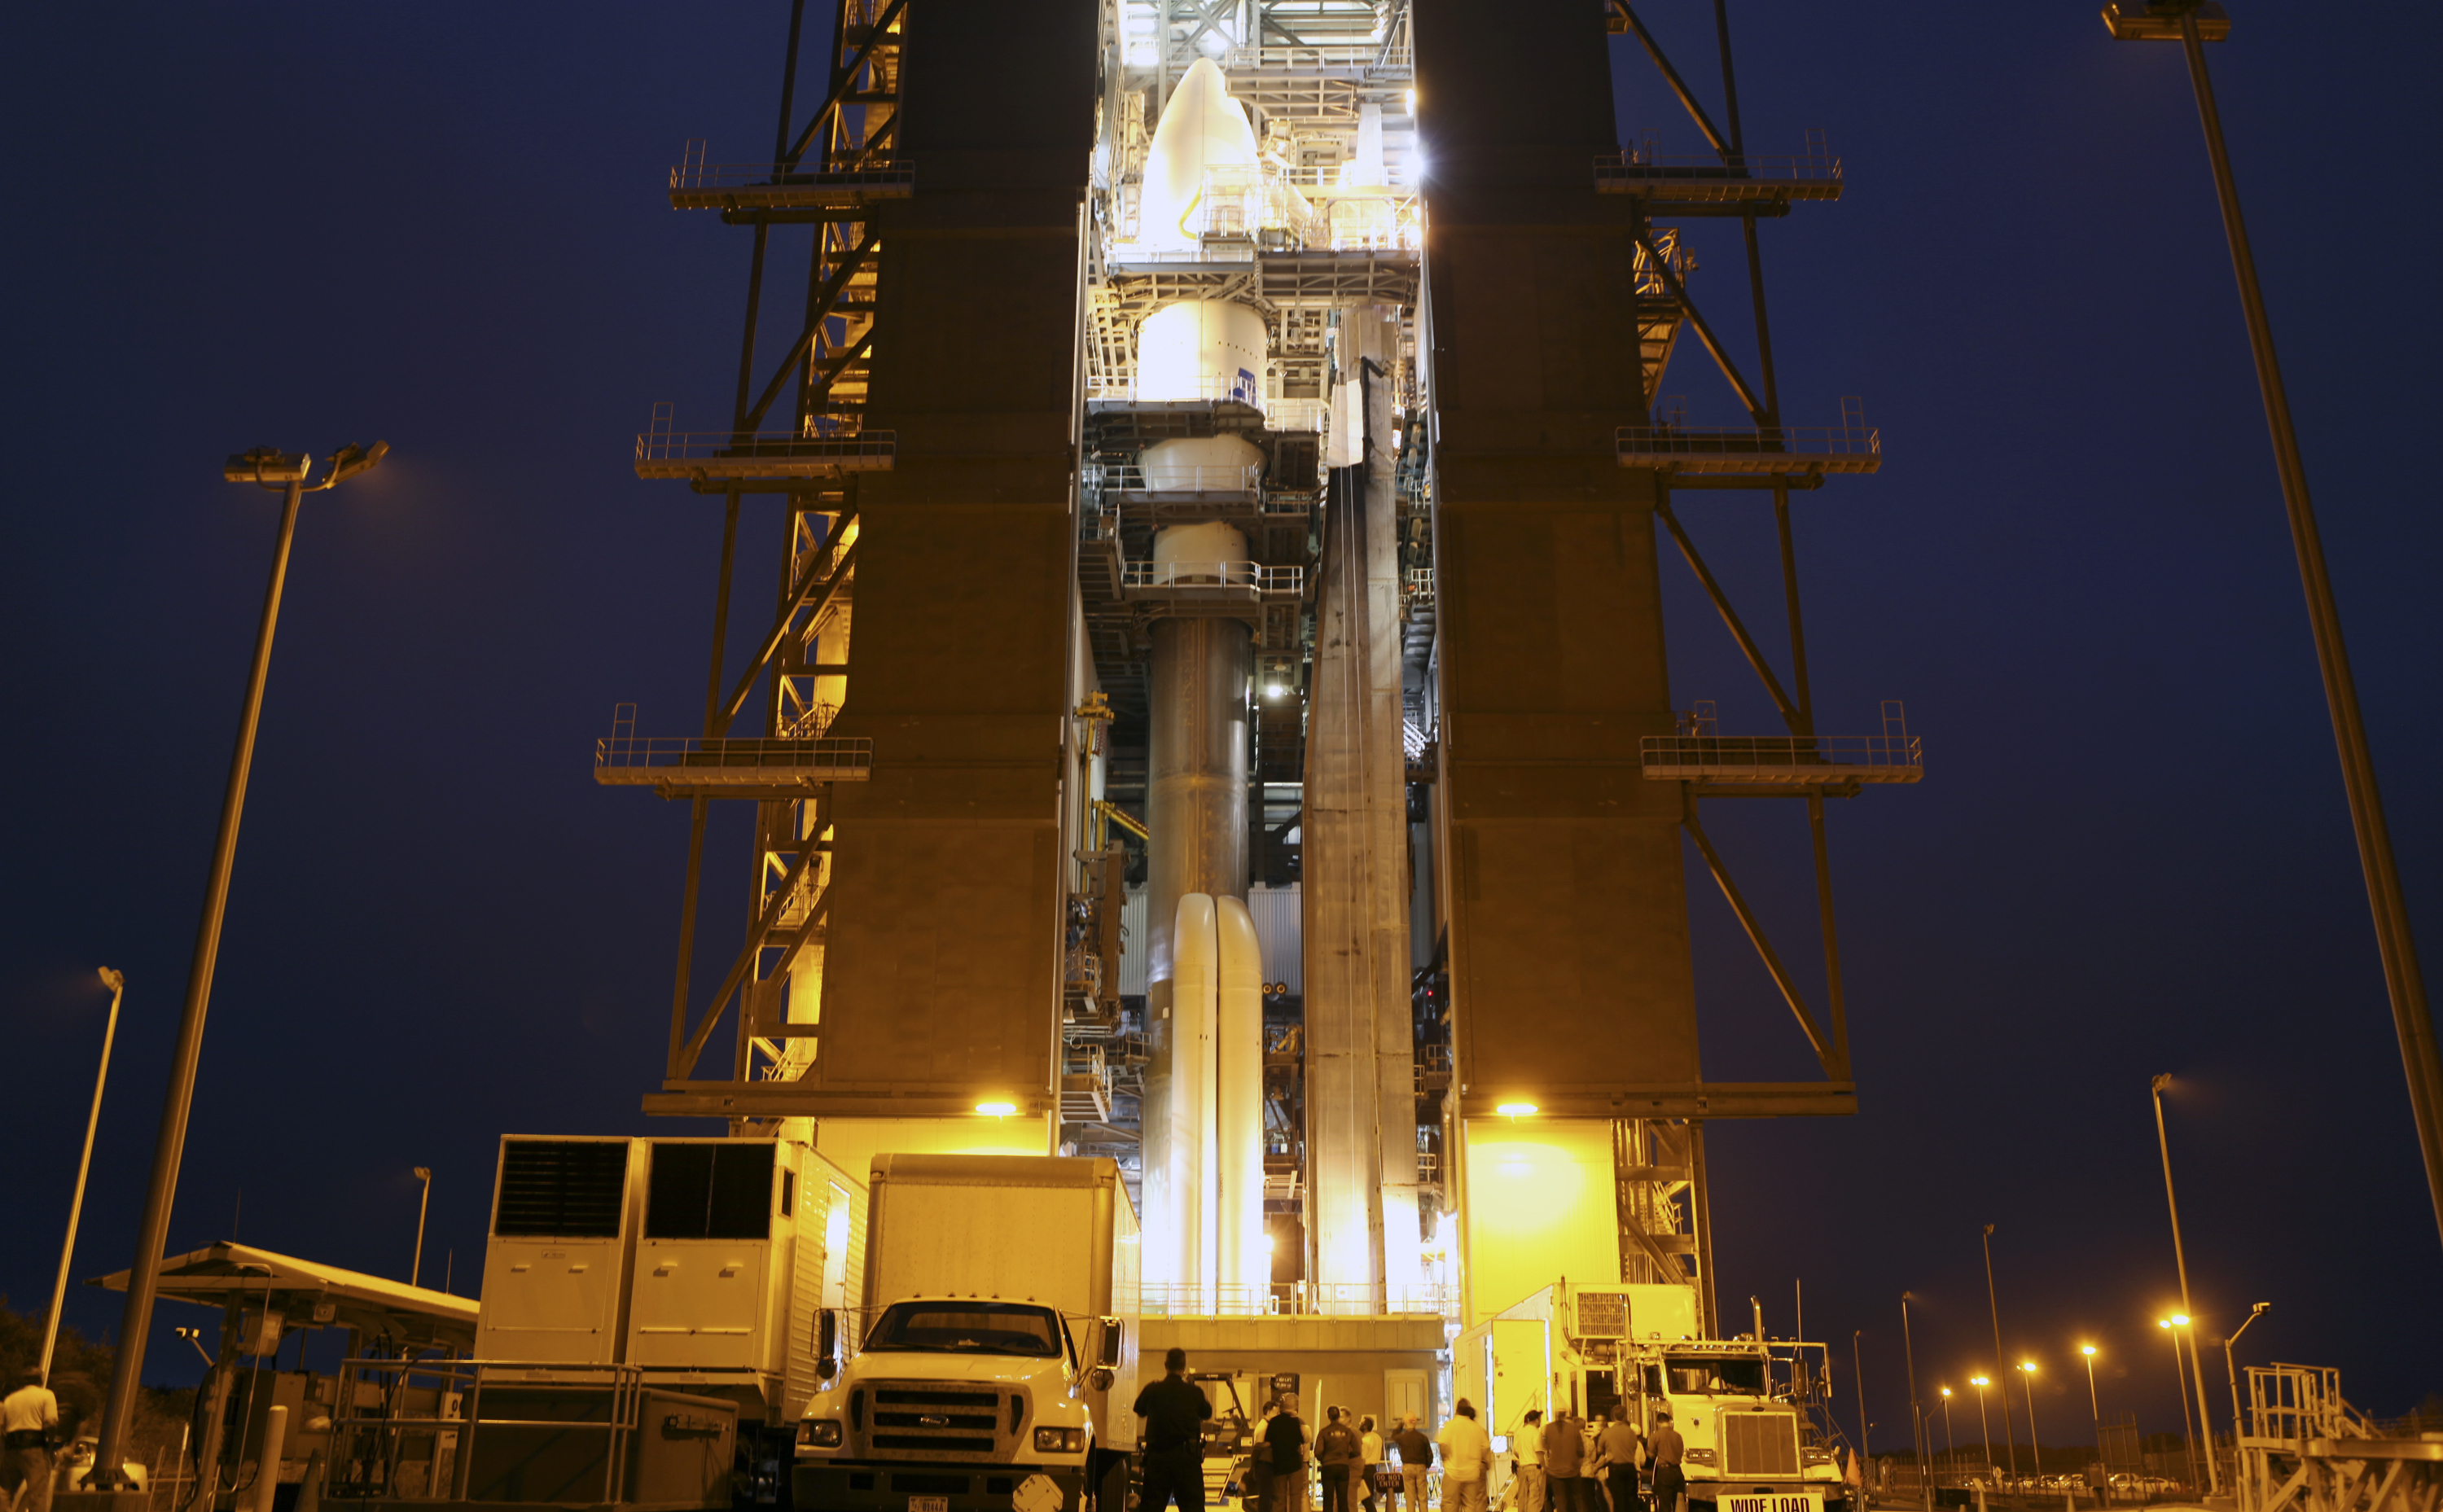 The Atlas V rocket set to launch NASA's Mars Science Laboratory (MSL) mission is illuminated inside the Vertical Integration Facility at Space Launch Complex 41, where employees have gathered to hoist the spacecraft's multi-mission radioisotope thermoelectric generator (MMRTG).